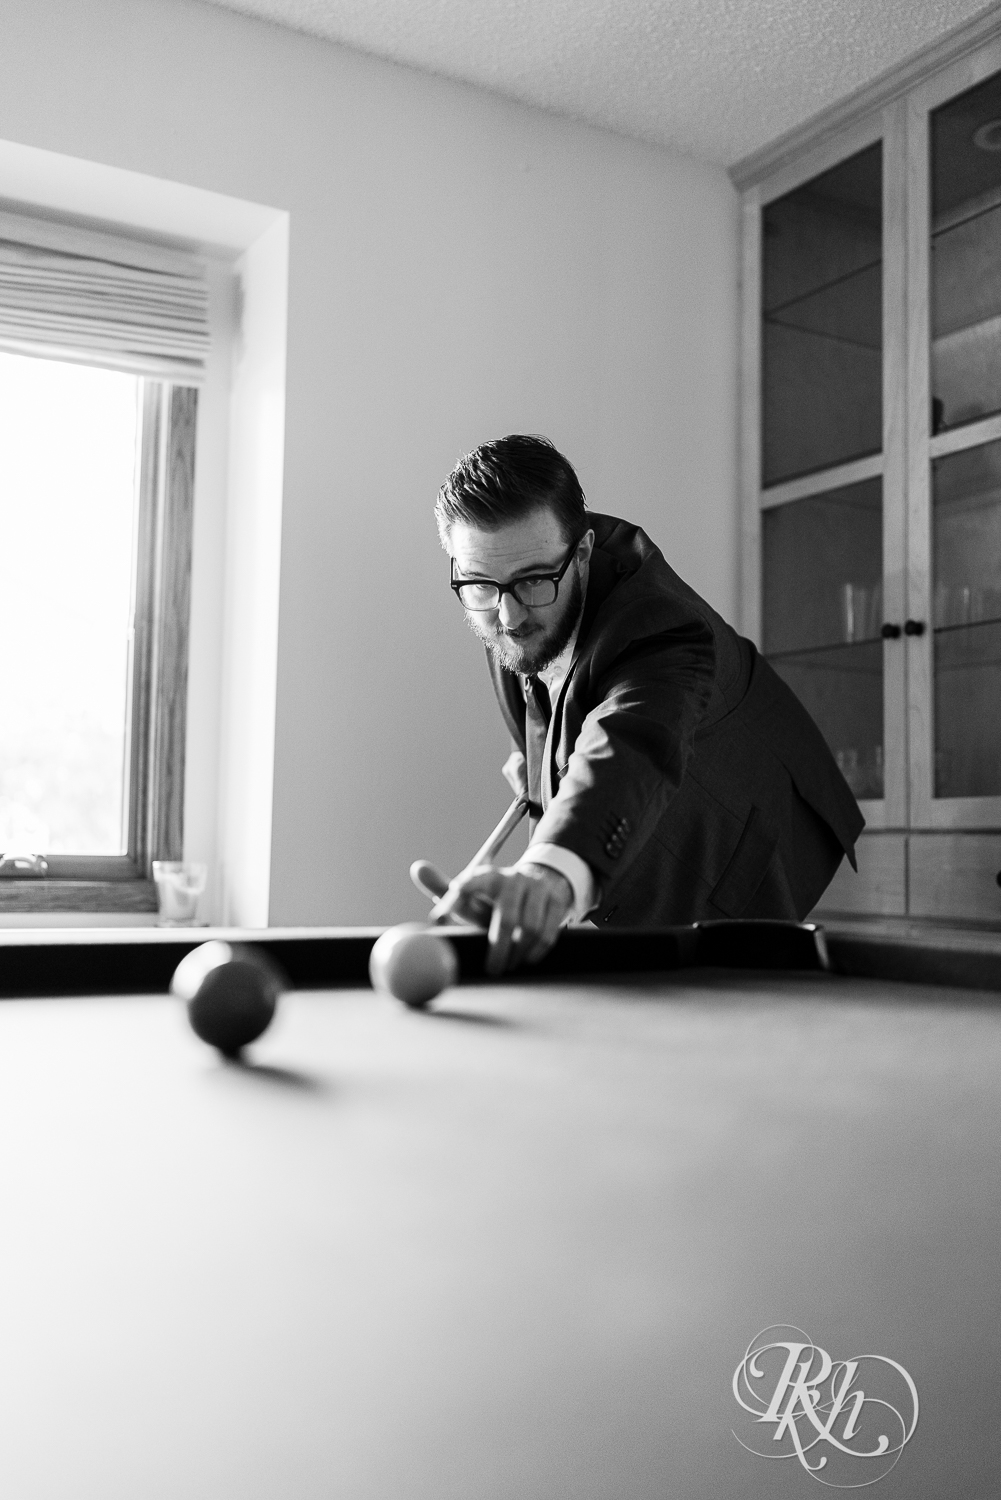 Groom plays pool at his house before his wedding.